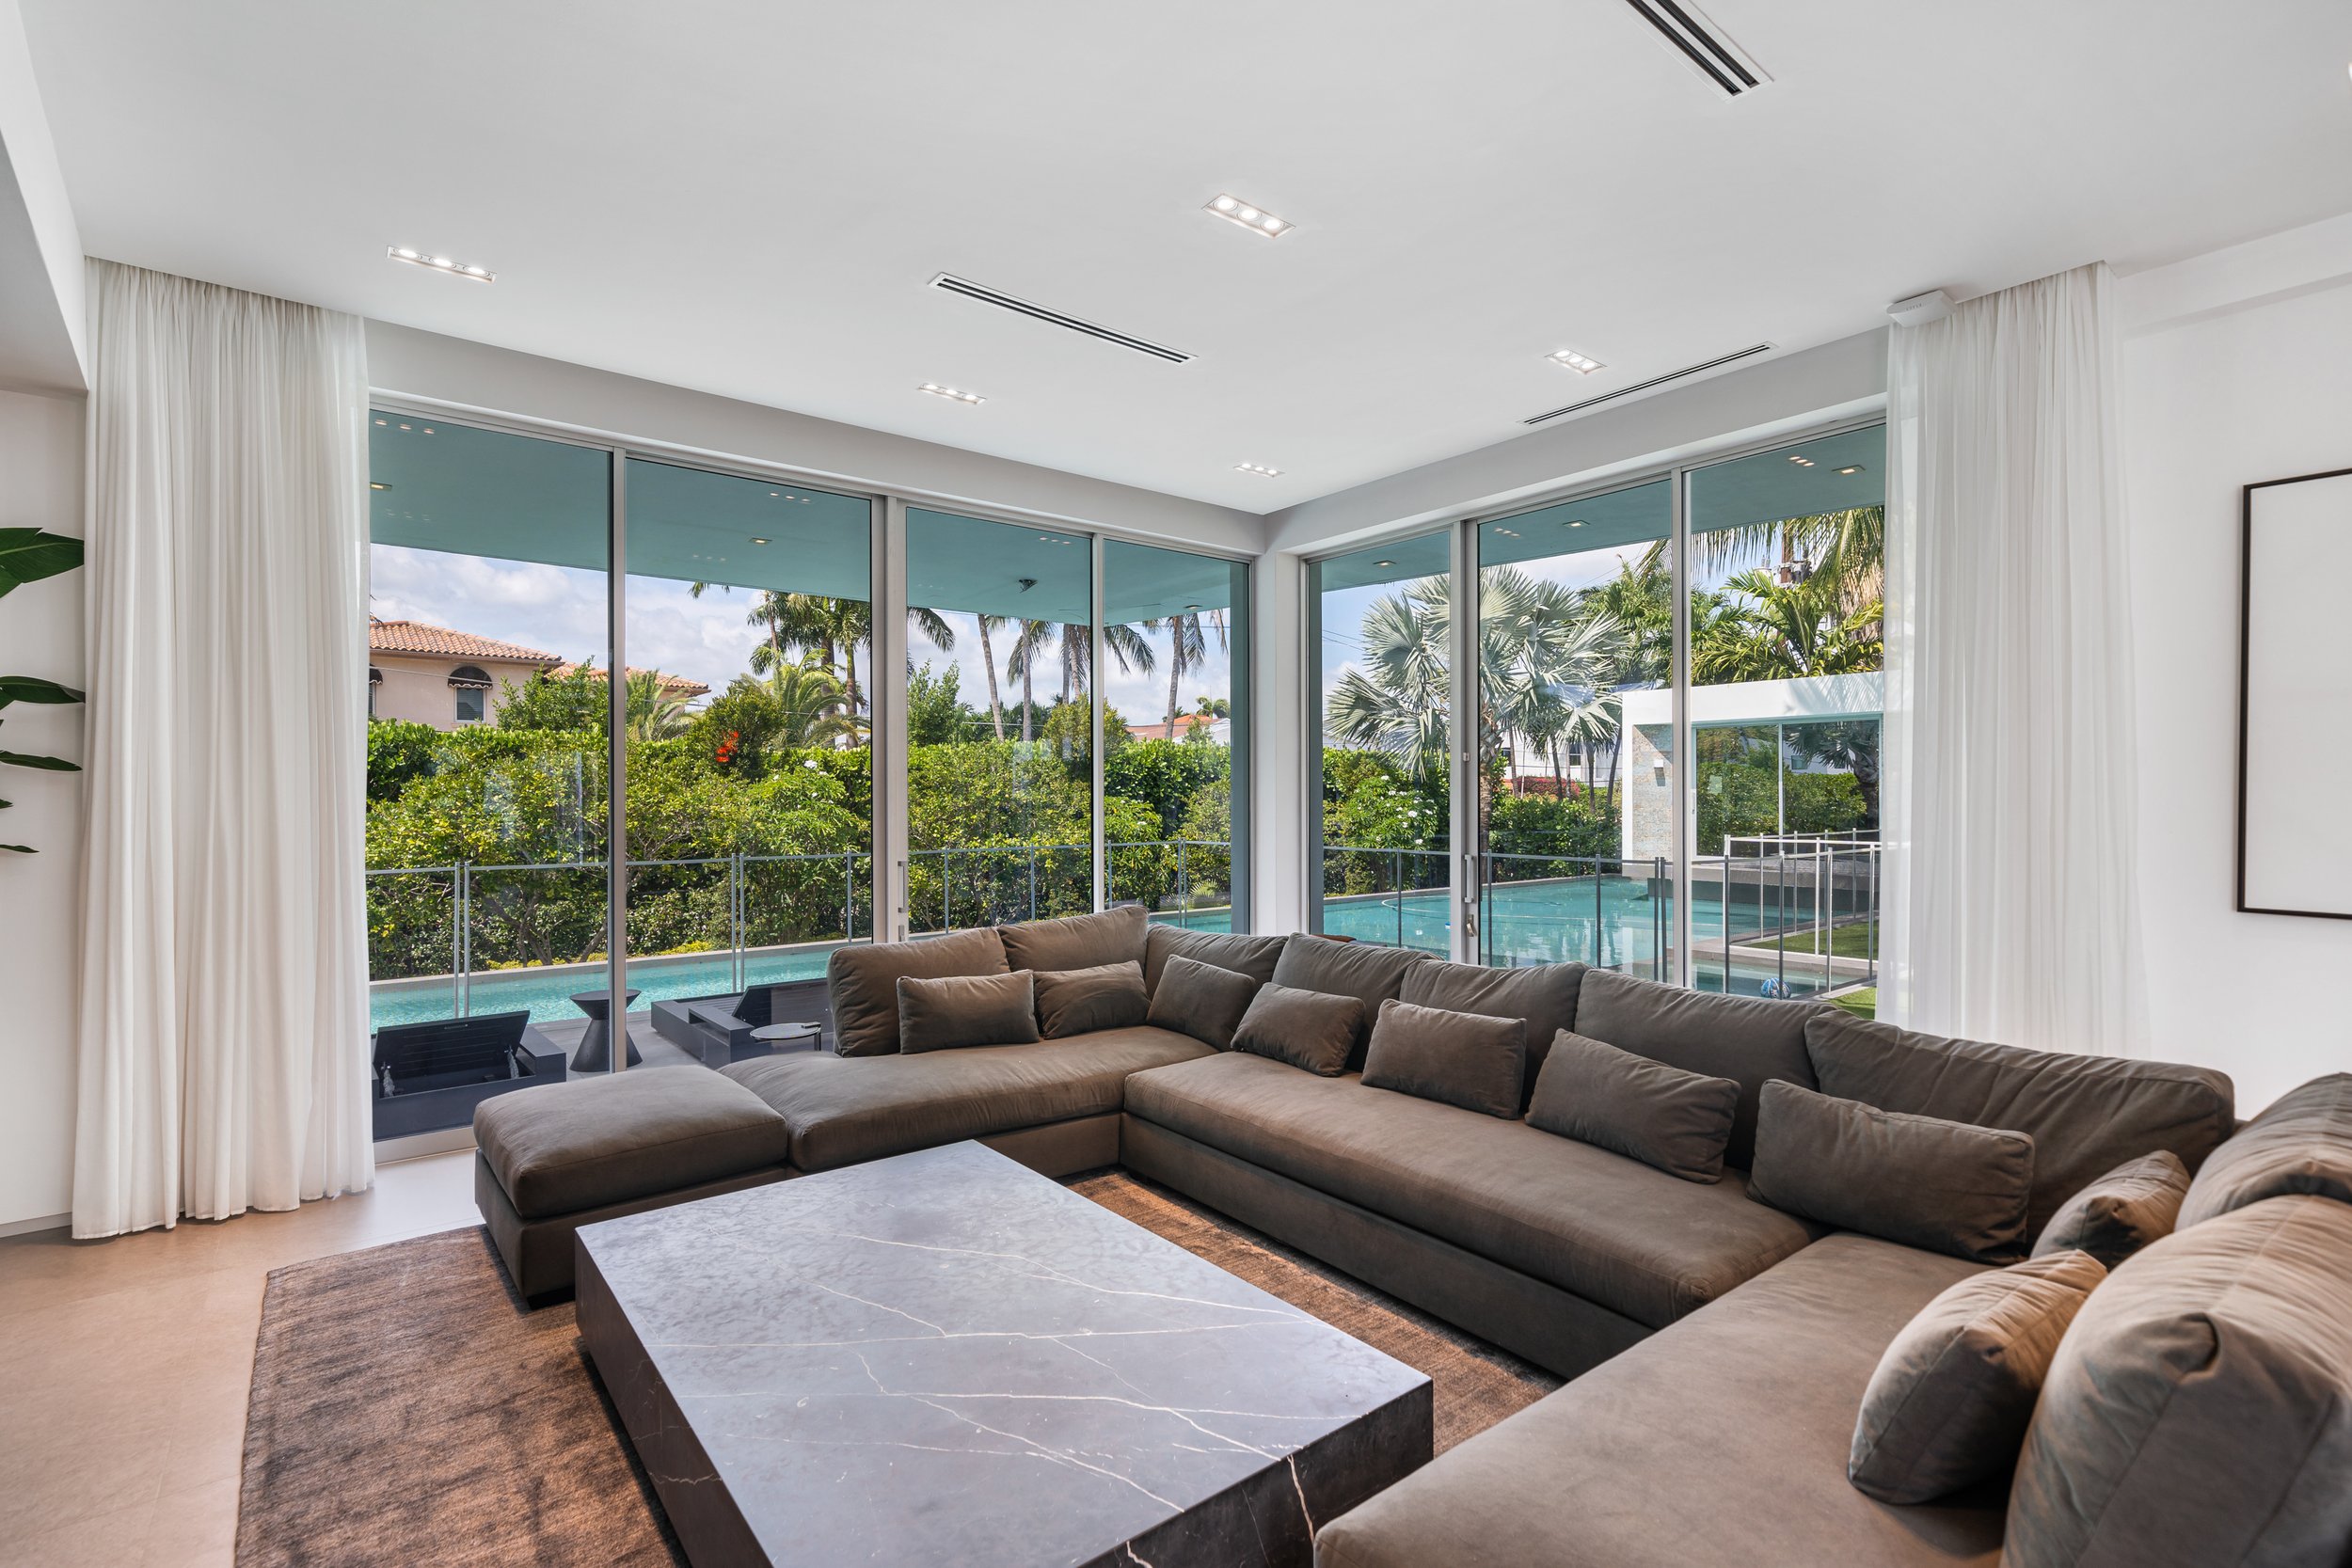 Miami Heat Star Victor Oladipo Lists Hibiscus Island Contemporary For $10 Million Amidst NBA Finals 3.jpg